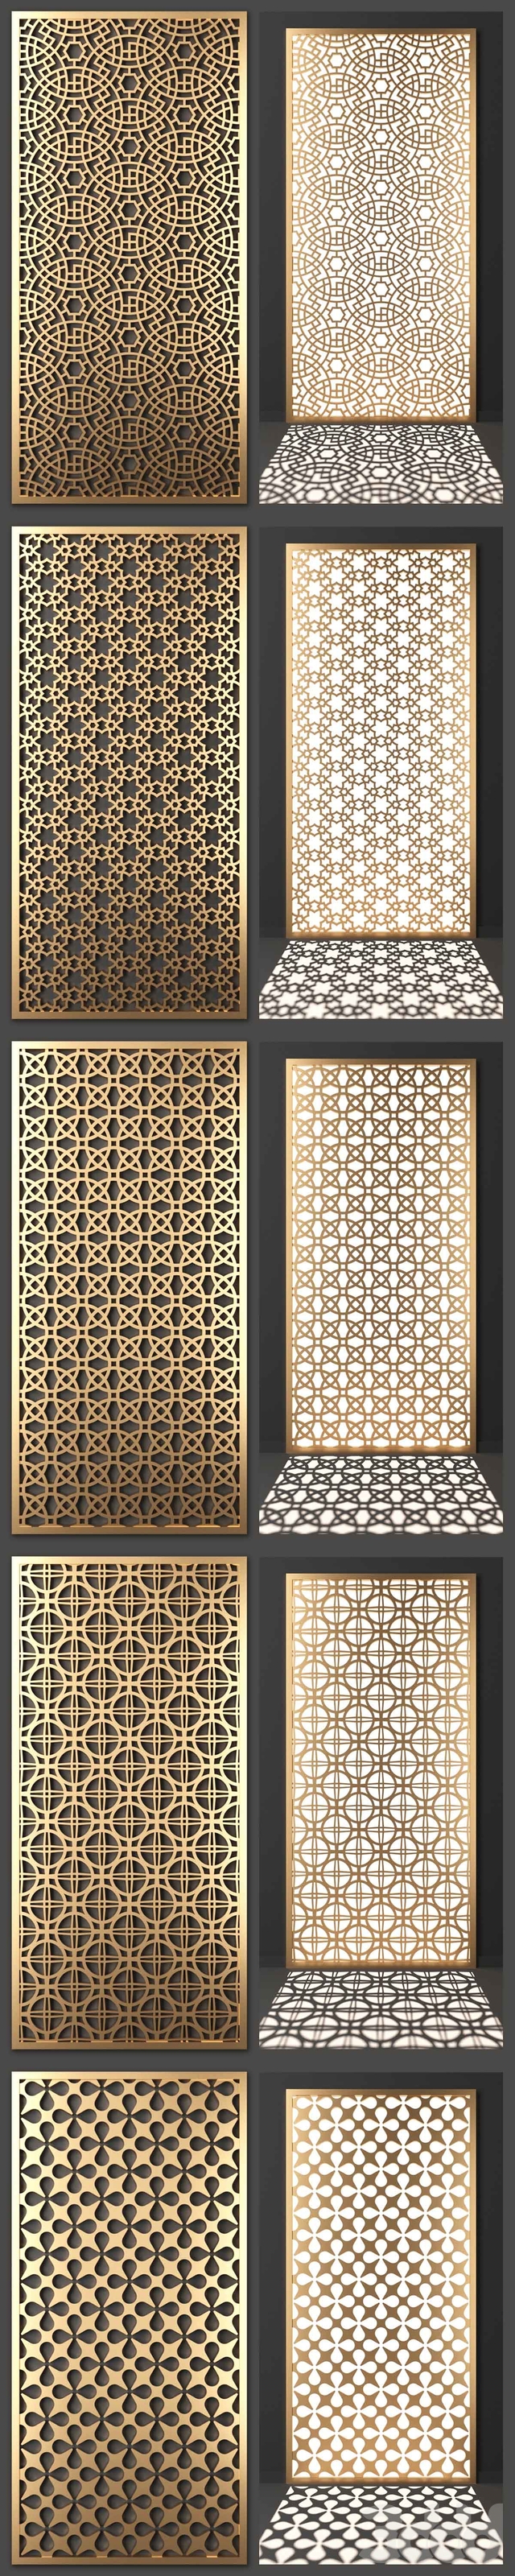 Stainless Steel Laser Cut Privacy Panels